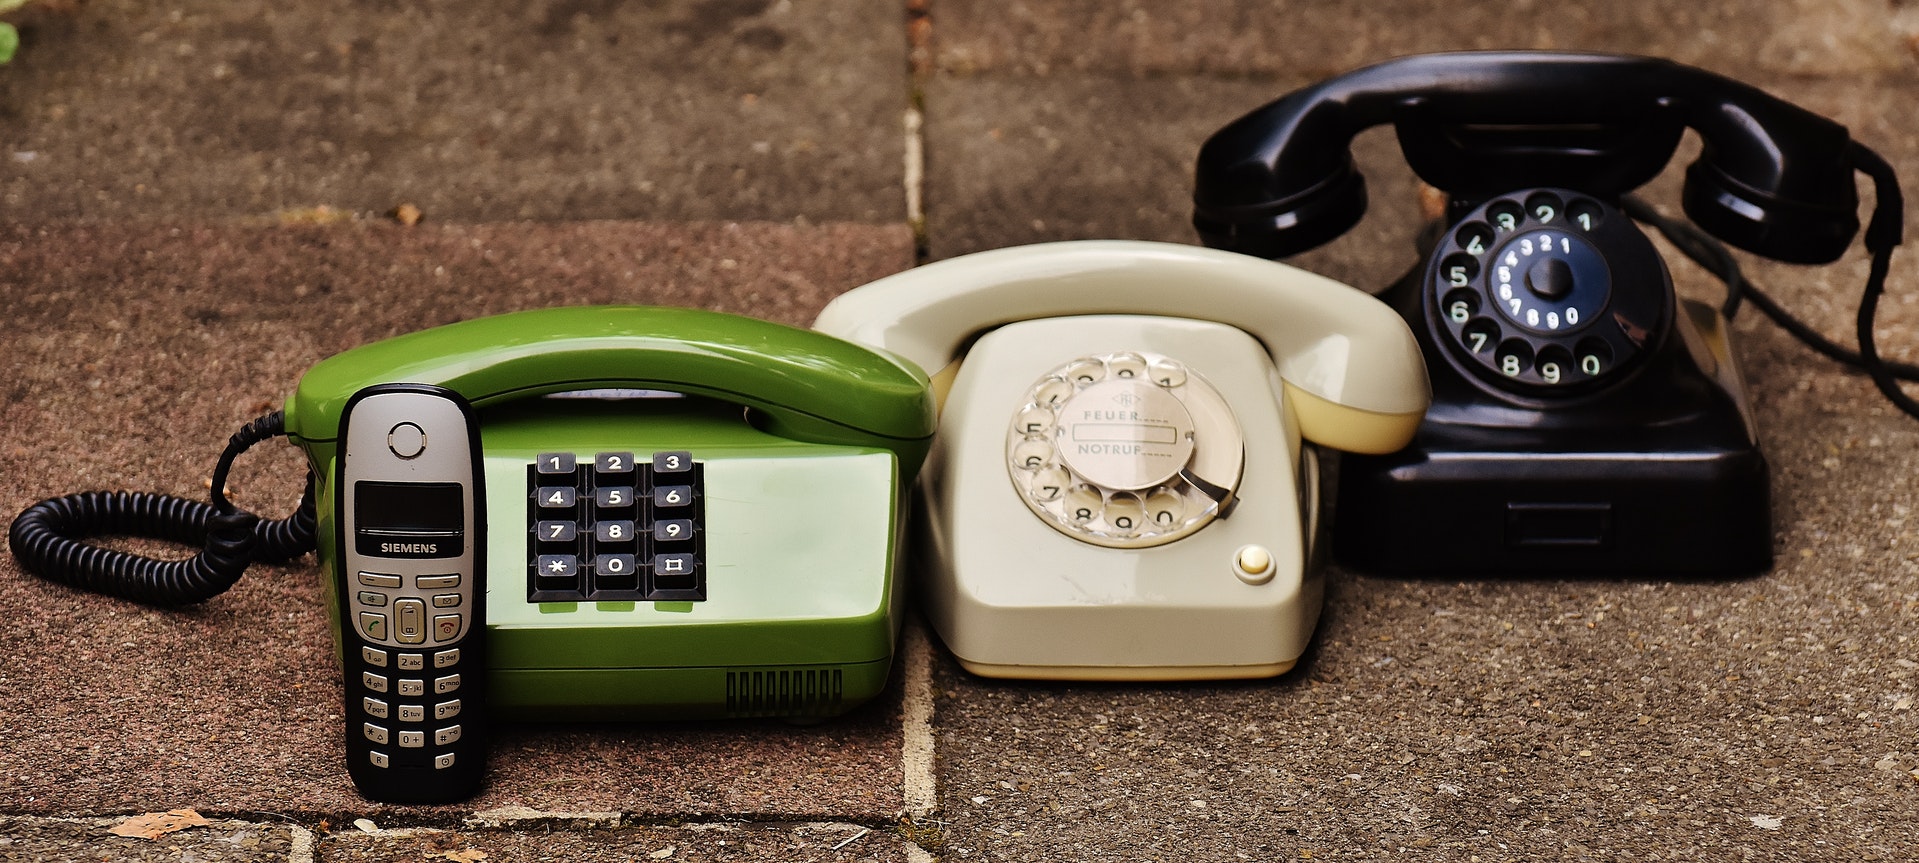 Three rotary telephones and a mobile phone